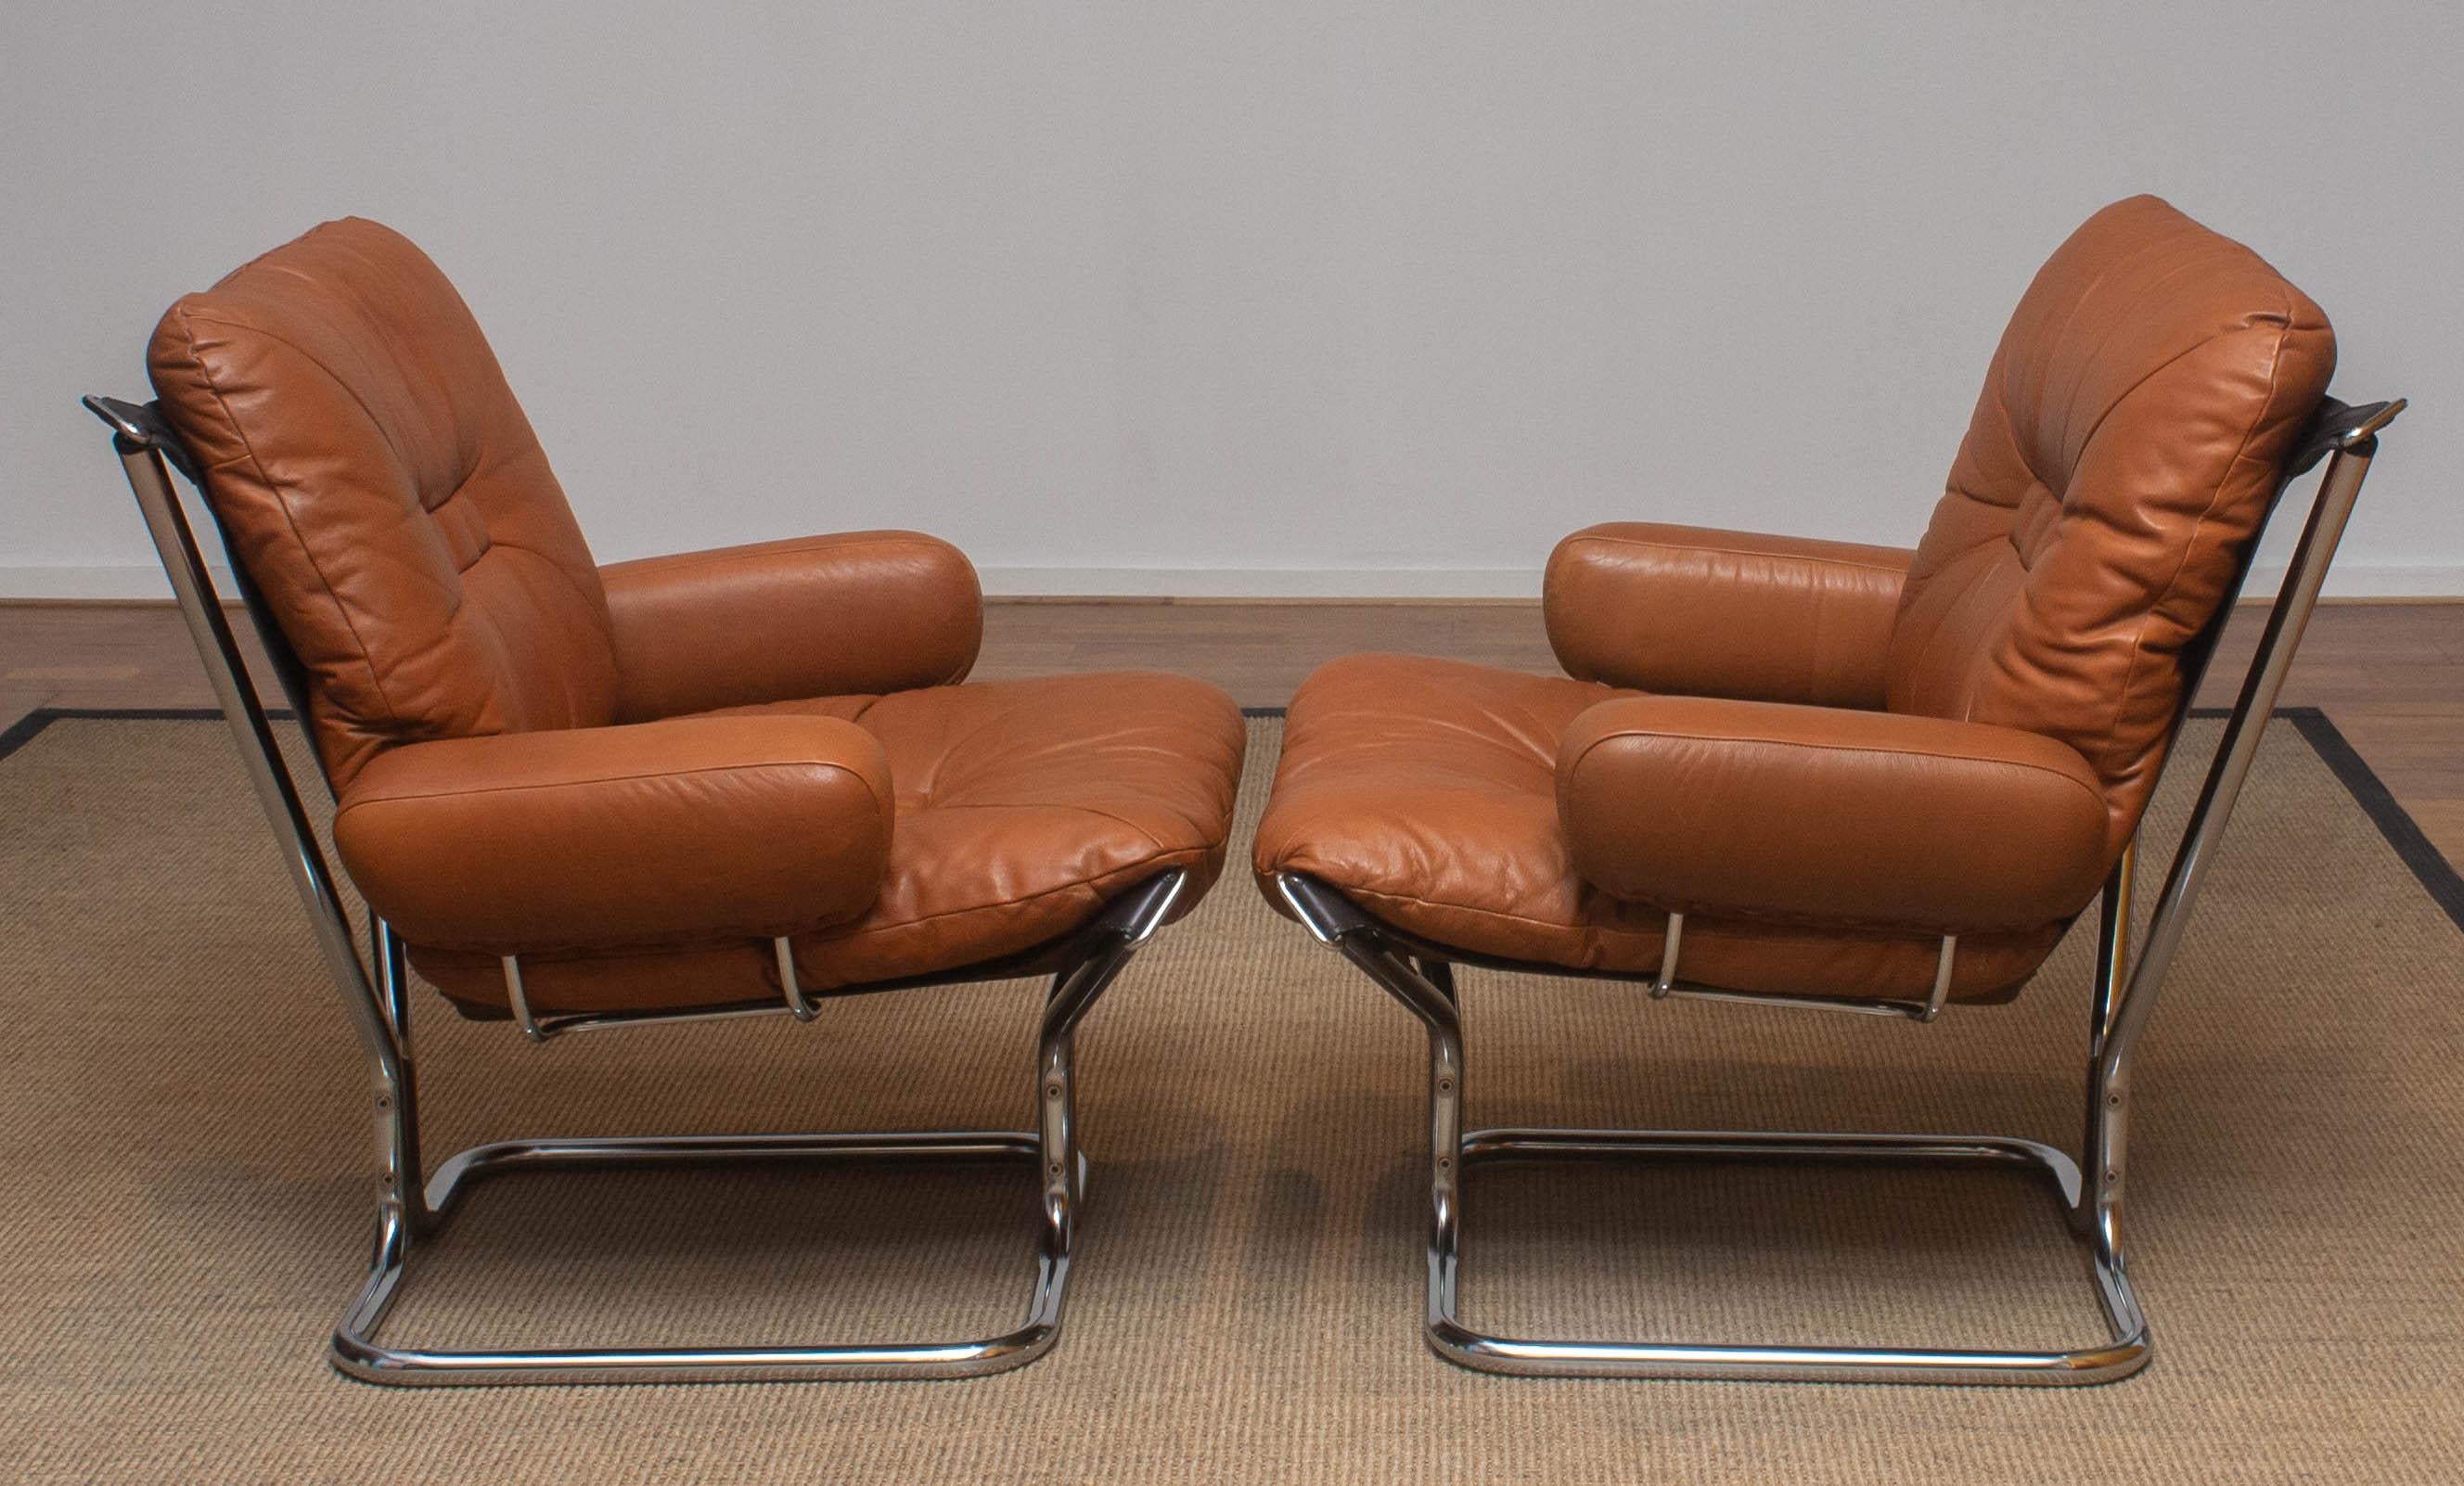 1970s Lounge Set Cognac Leather and Steel by Harald Relling for Westnofa, Norway 2